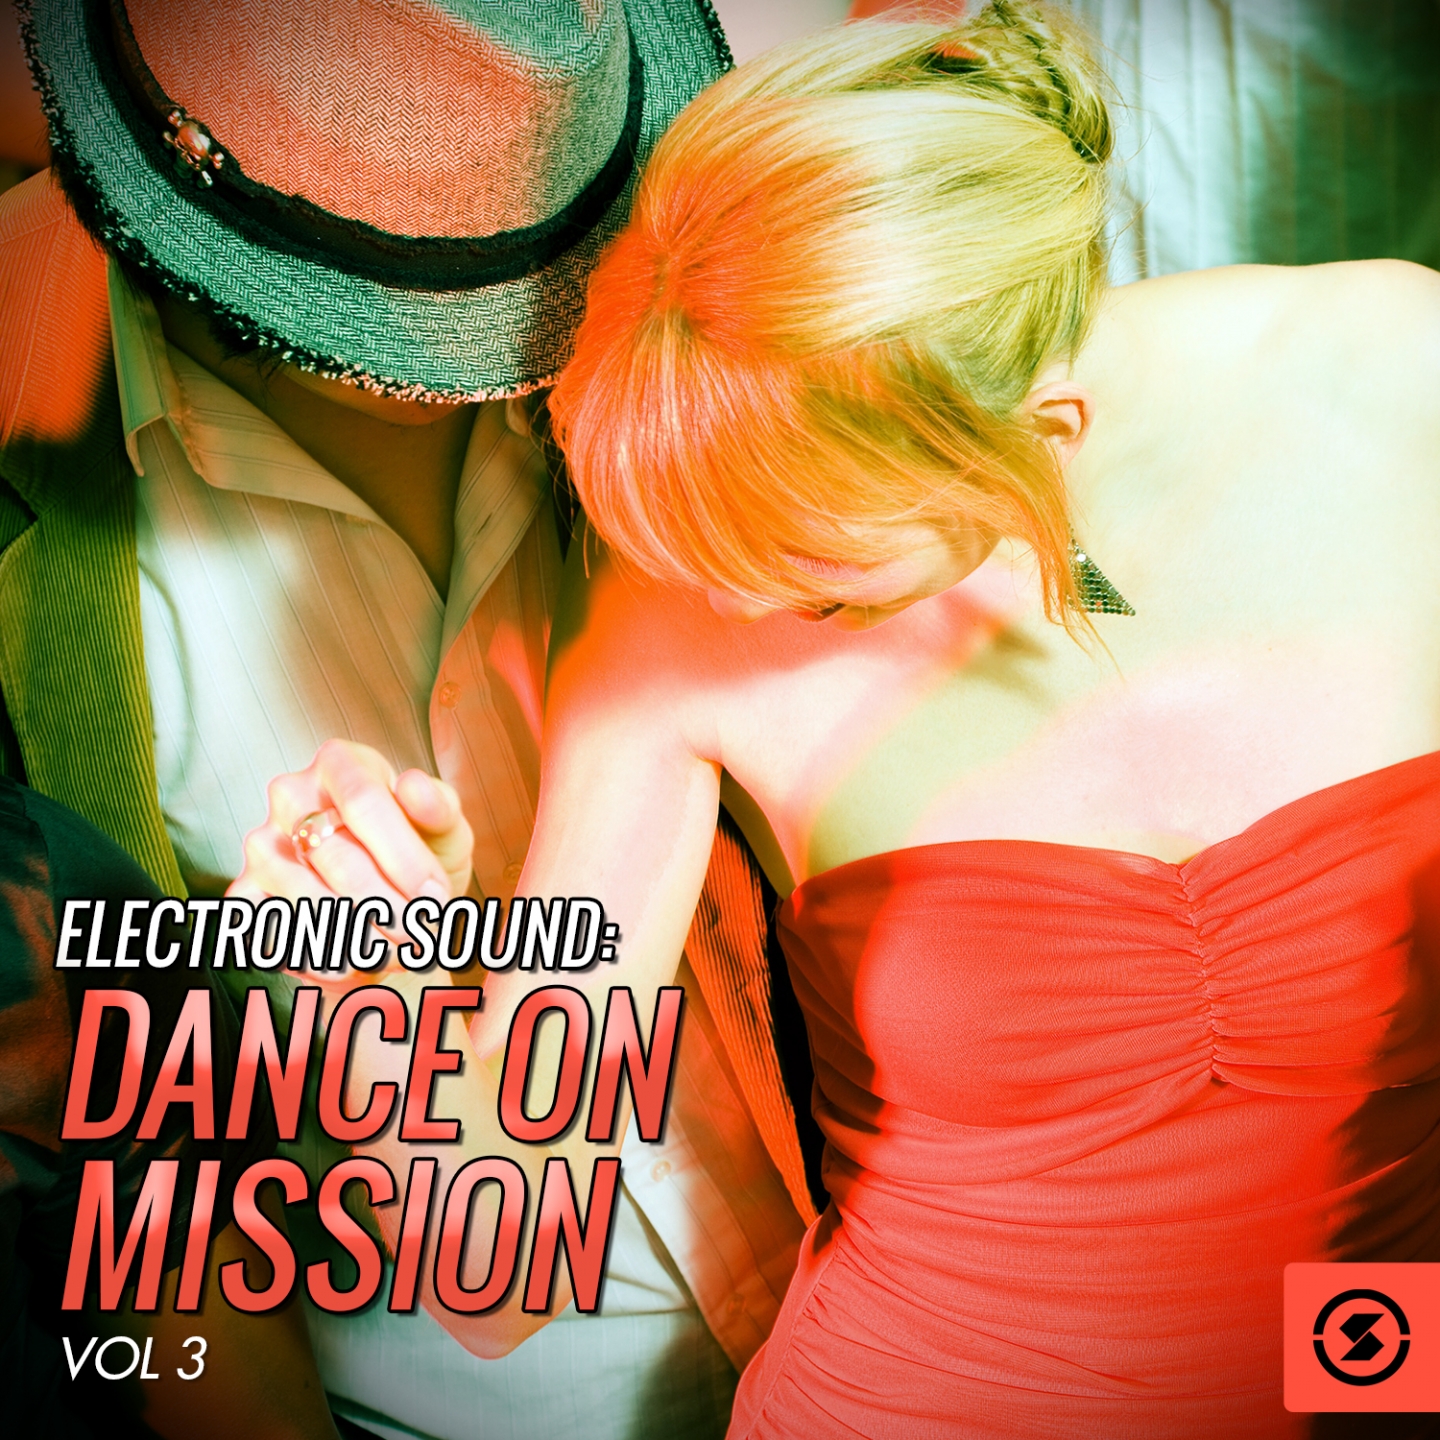 Electronic Sound: Dance on Mission, Vol. 3